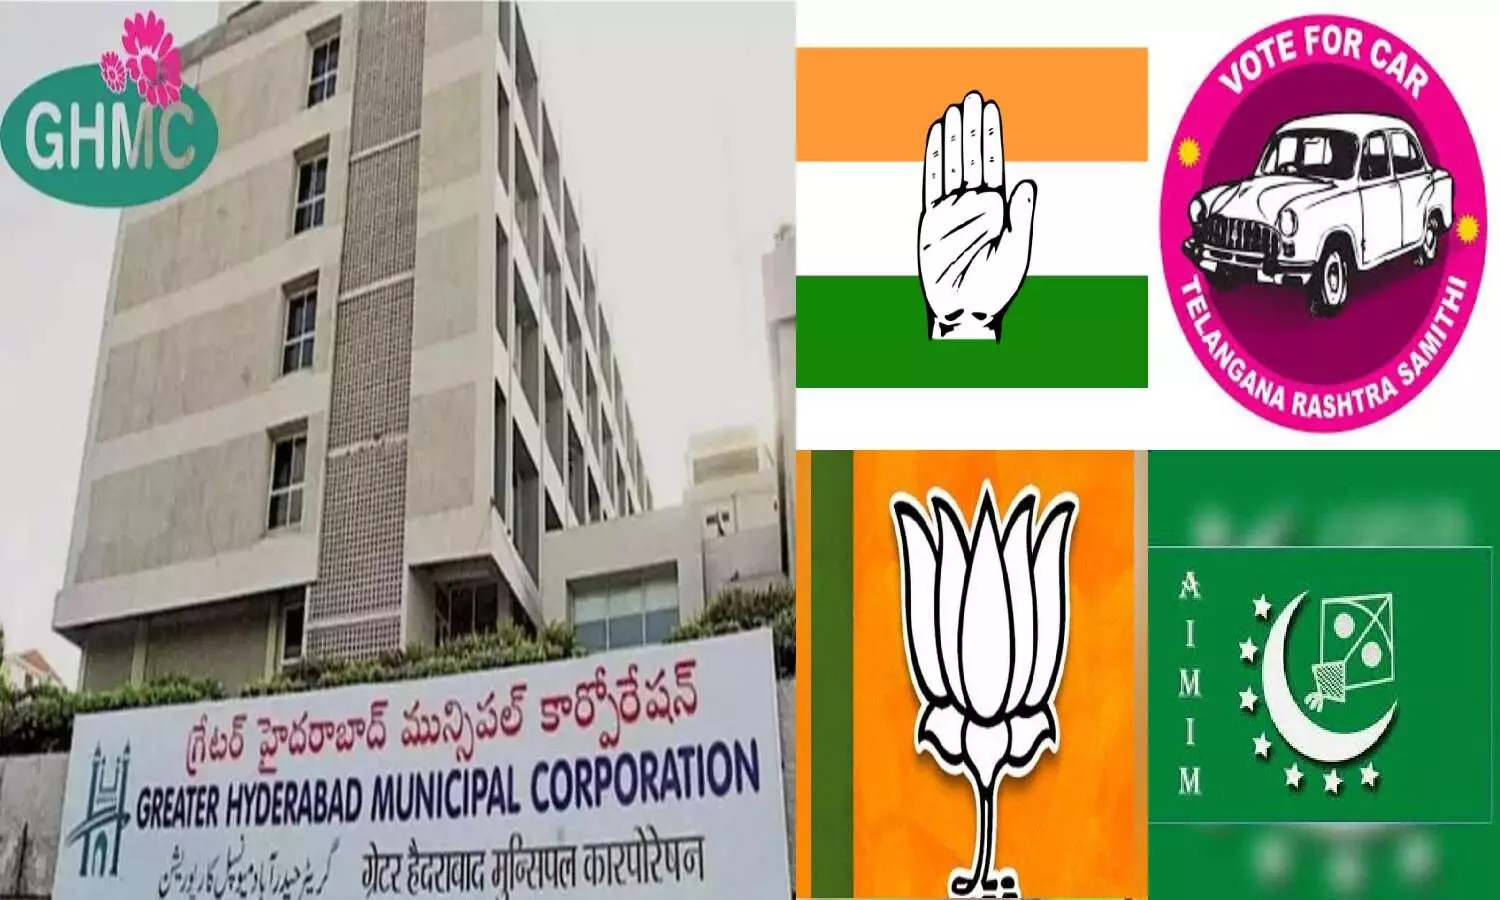 25 newly-elected GHMC corporators have criminal records